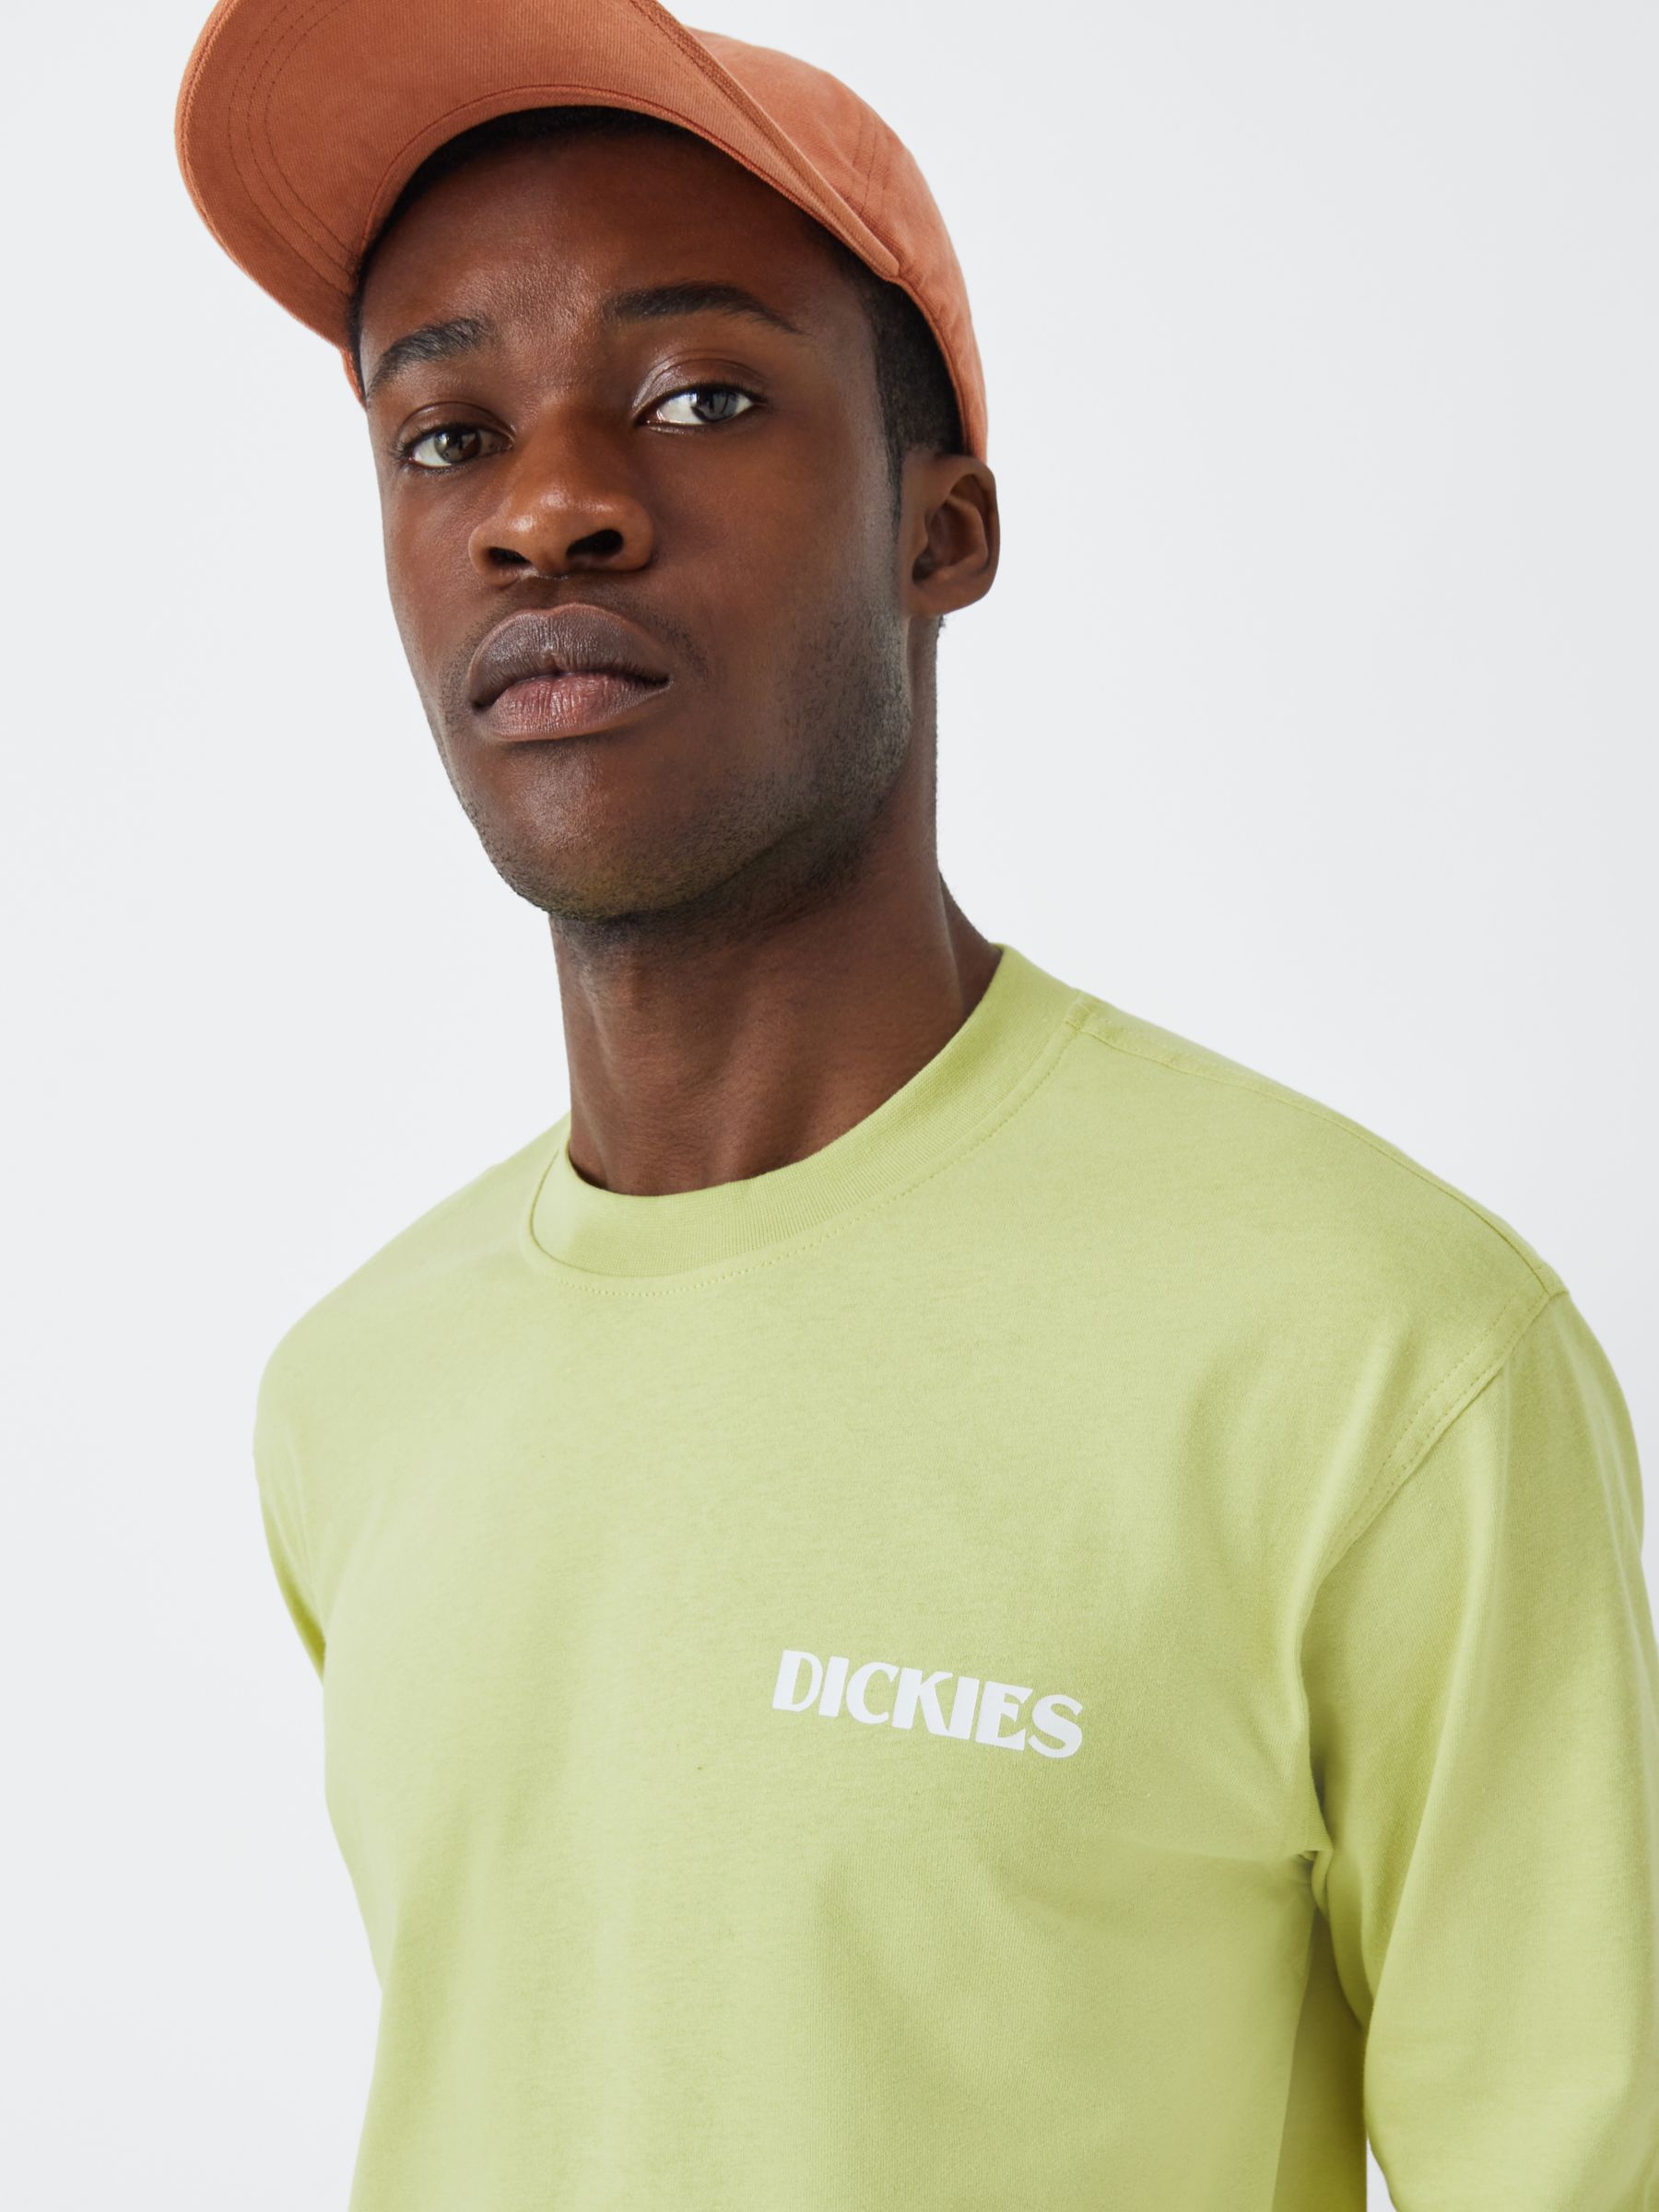 Dickies Timberville Graphic Long Sleeve T-Shirt, Pale Green, XL